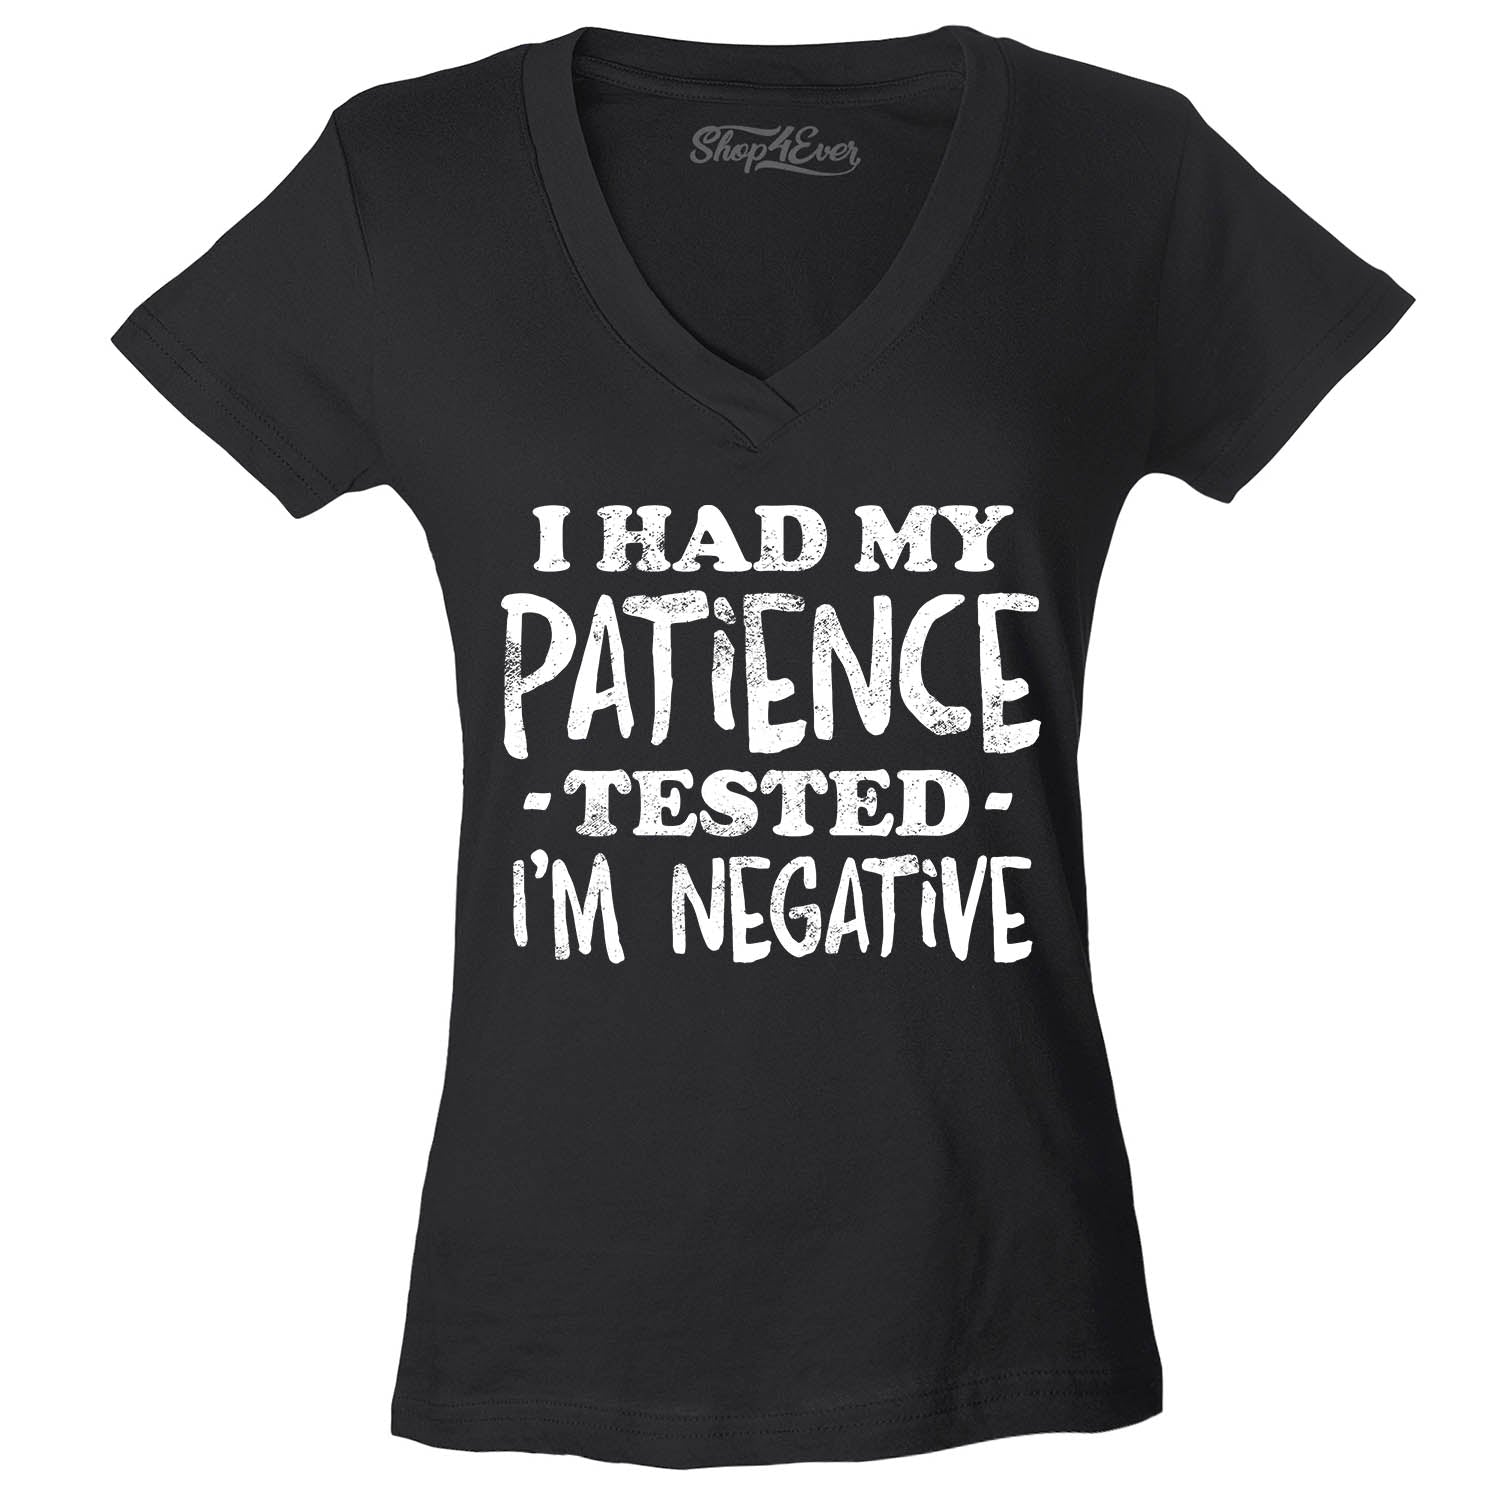 I Had My Patience Tested I'm Negative Women's V-Neck T-Shirt Slim Fit